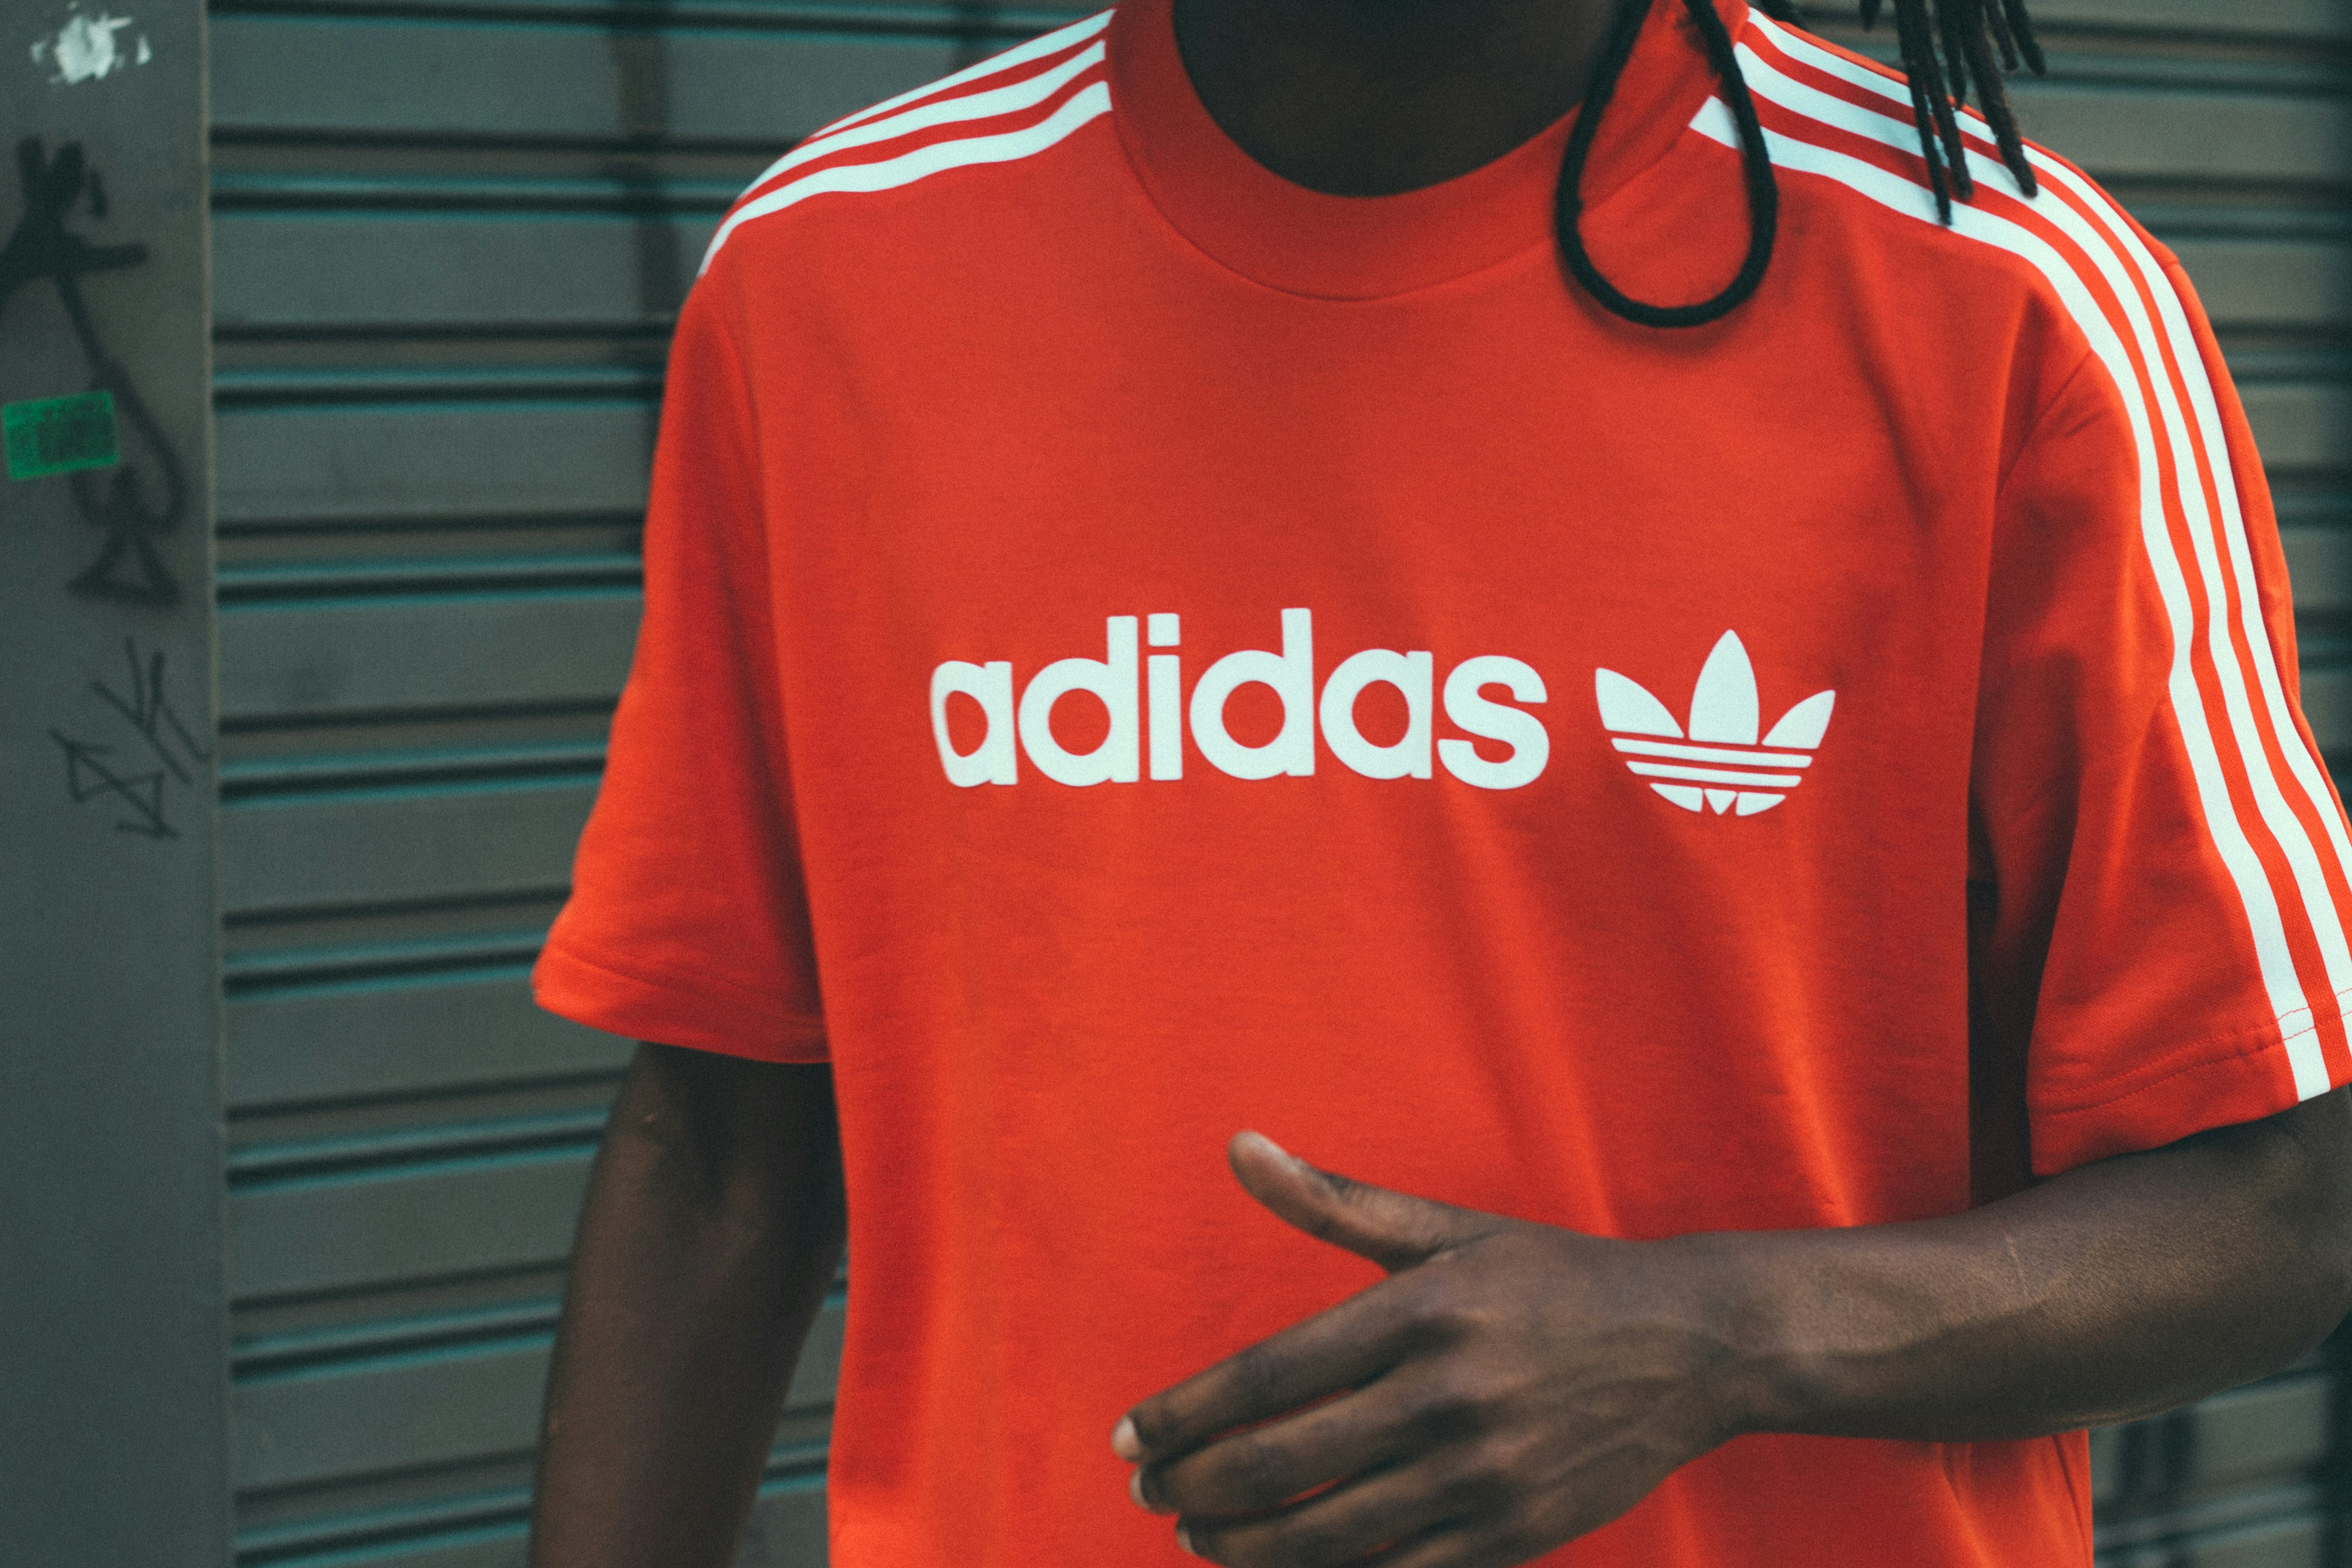 adidas red and white t shirt